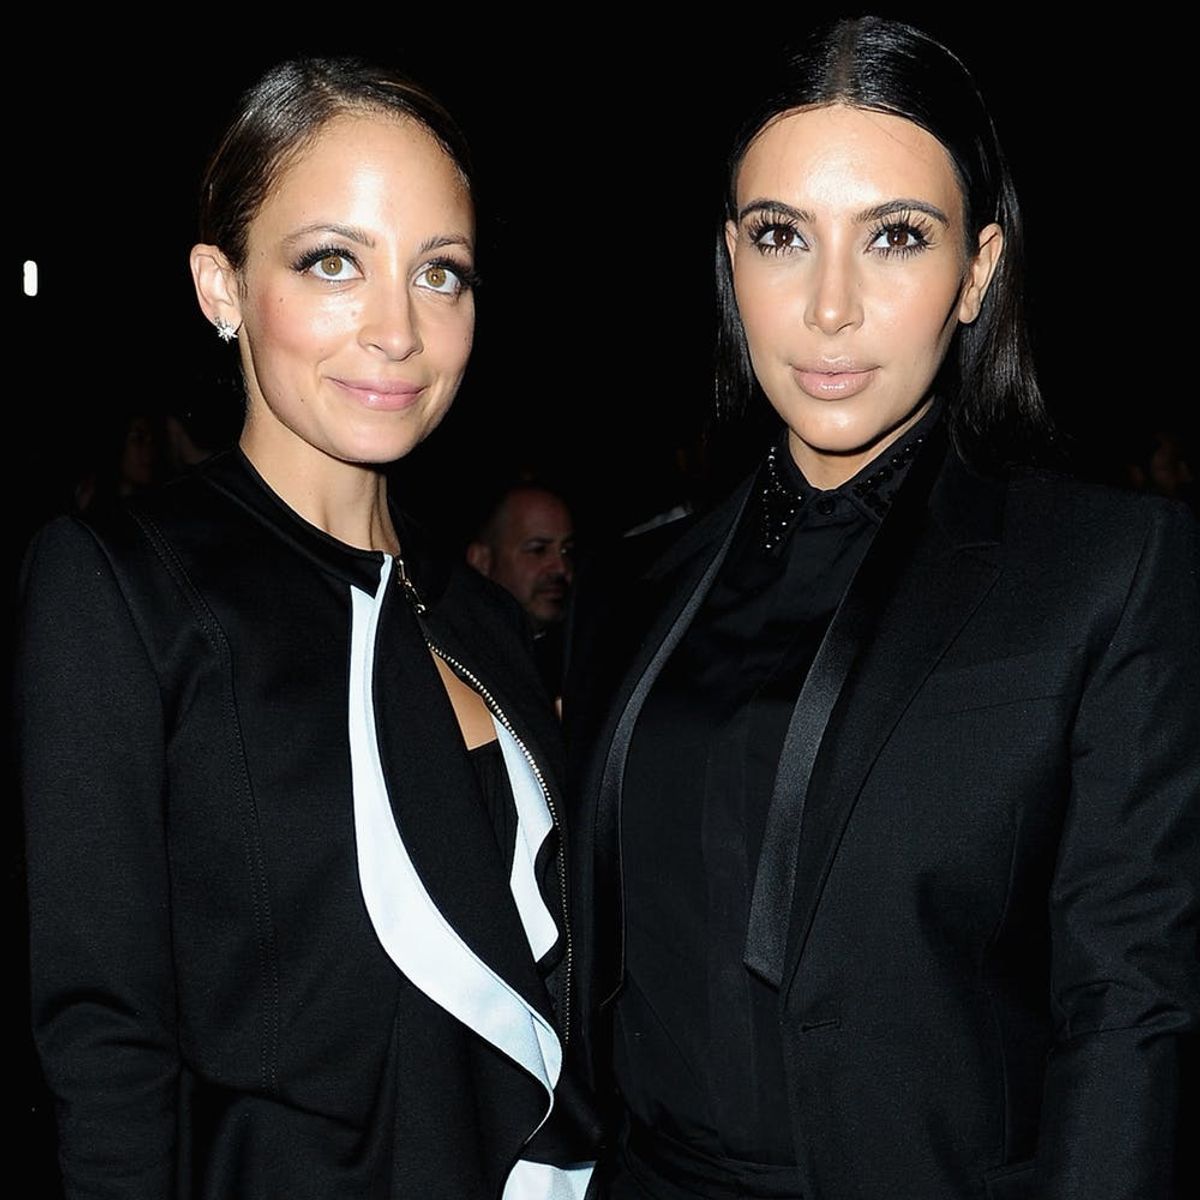 This Is the Lipstick Kim Kardashian West and Nicole Richie Broke the Law for As Kids